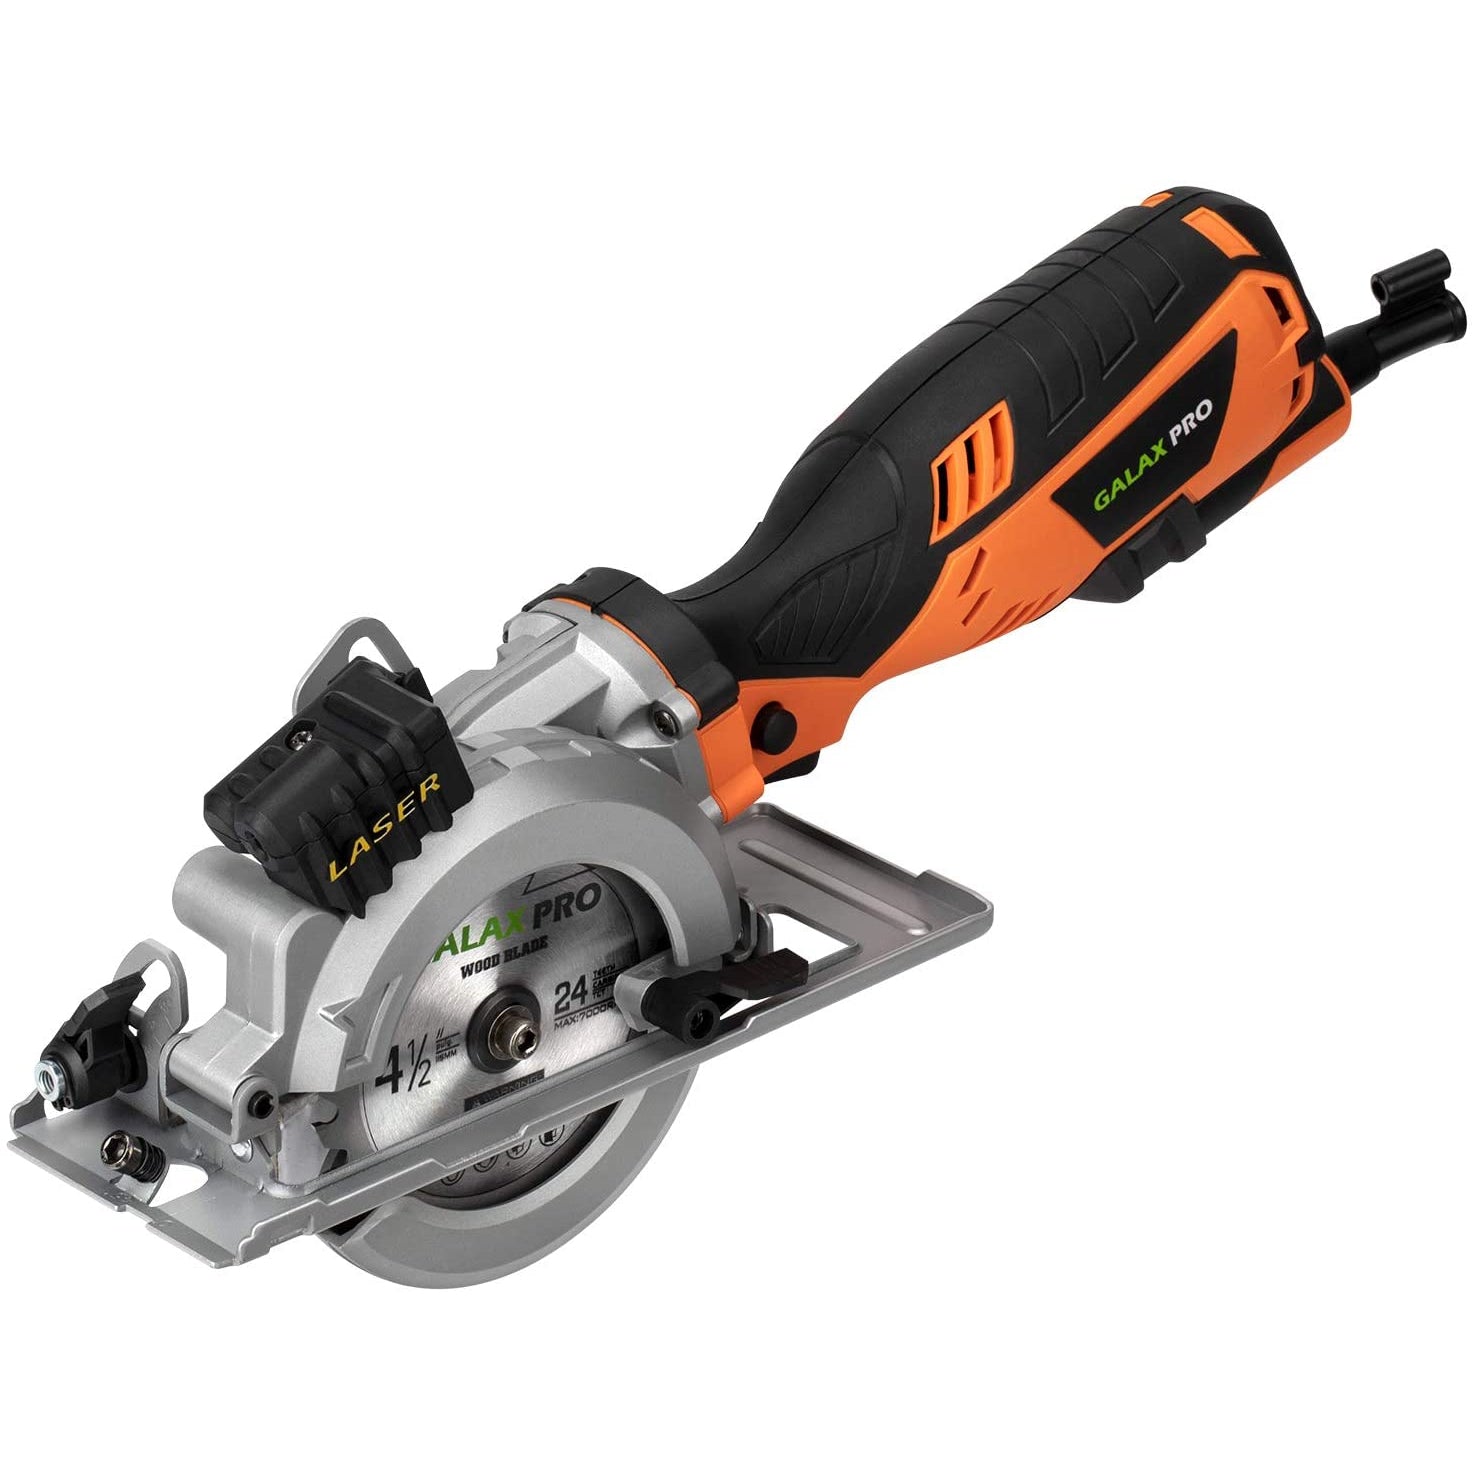 GALAX PRO Mini Circular Saw Ideal for Wood, Soft Metal, Tile and Plastic Cuts